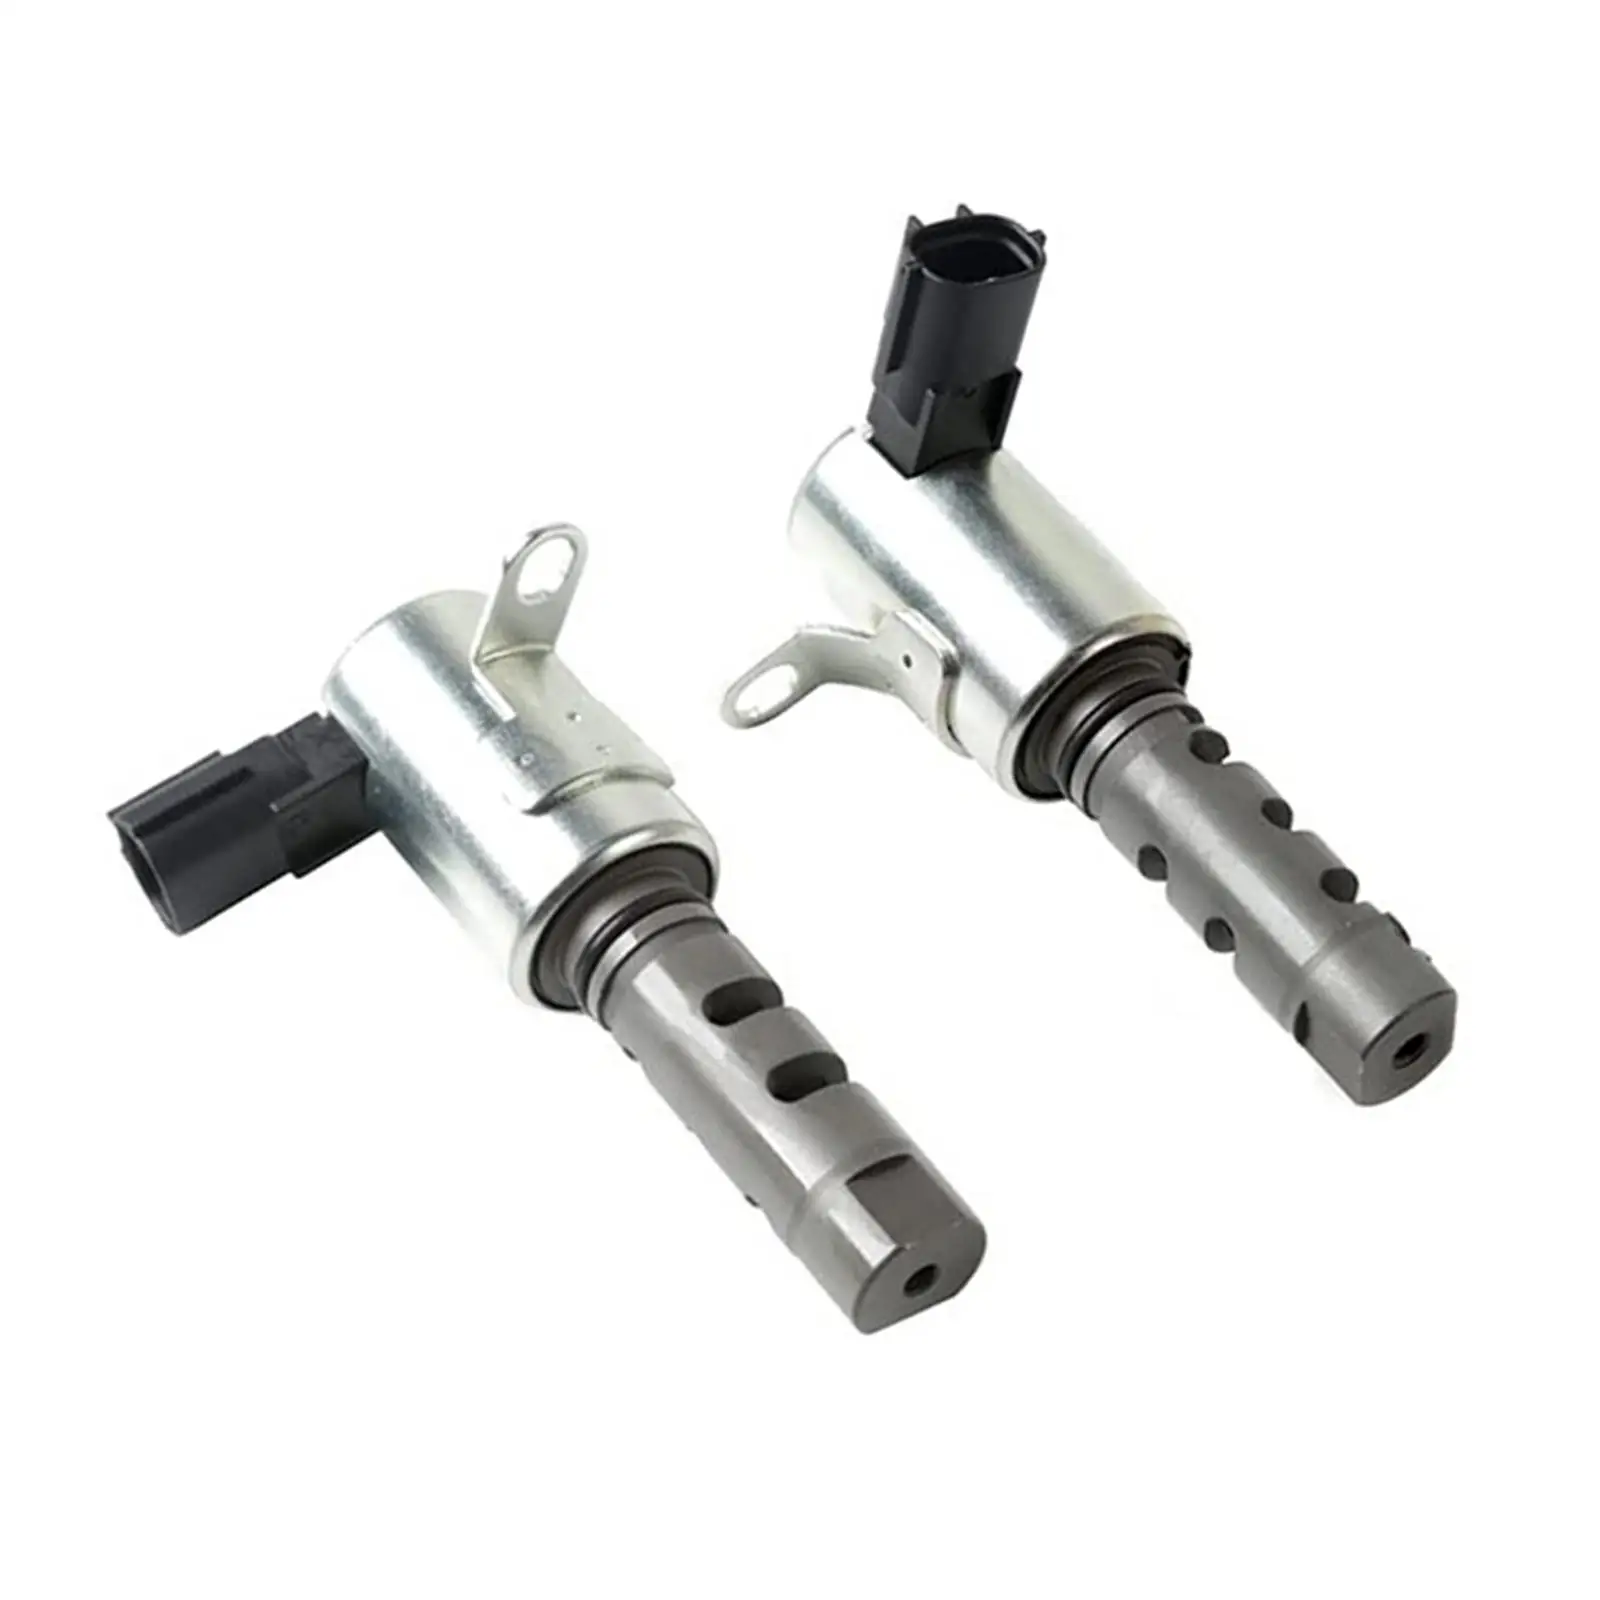 2 Pieces Vvt Valve Engine Variable Timing Solenoid for Toyota Accessory